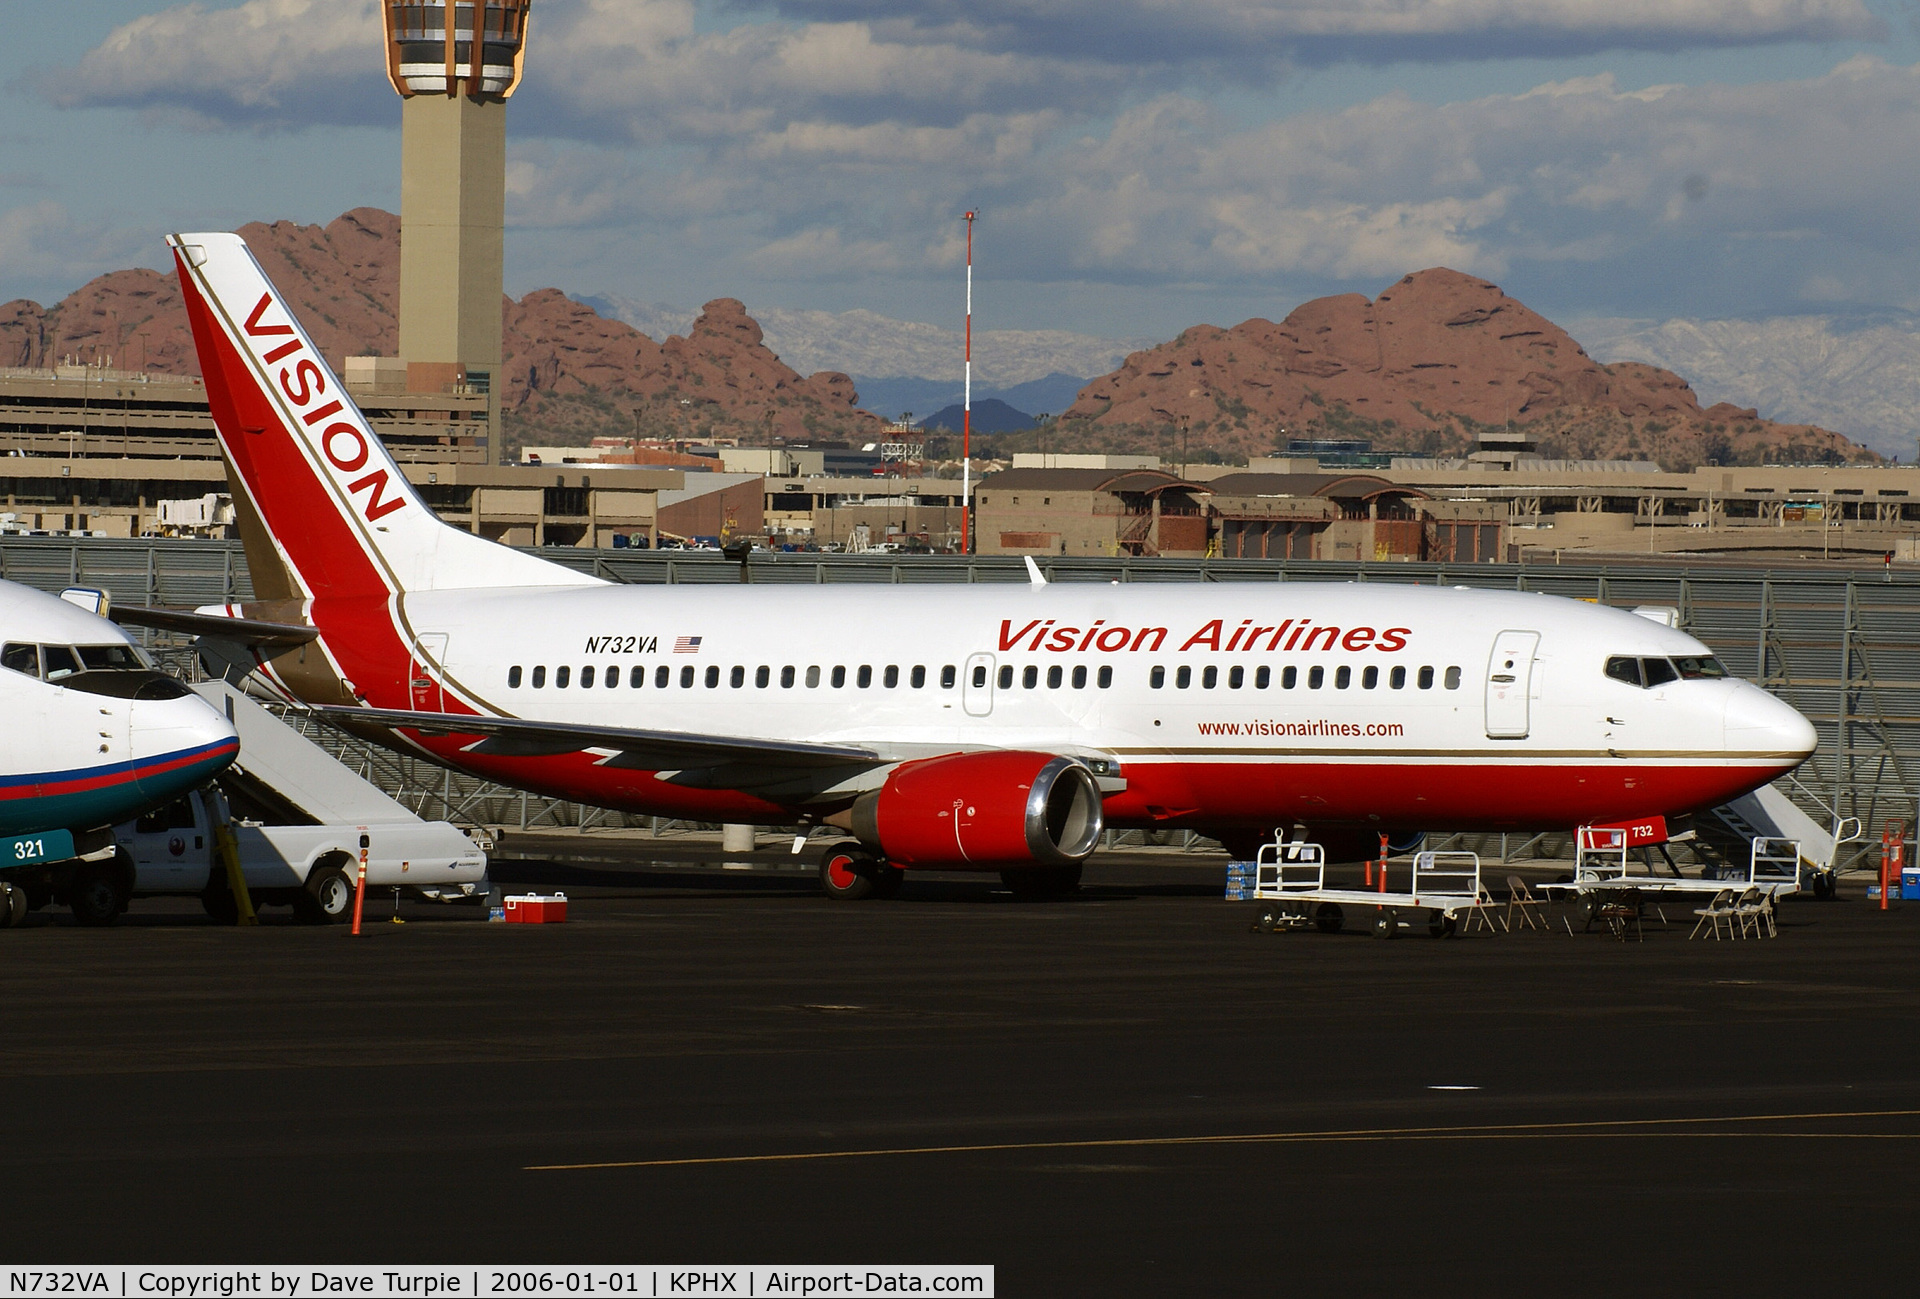 N732VA, 1985 Boeing 737-3TO C/N 23366, The date my camera recorded was wrong.  The picture was taken sometime in 2013 at KPHX.